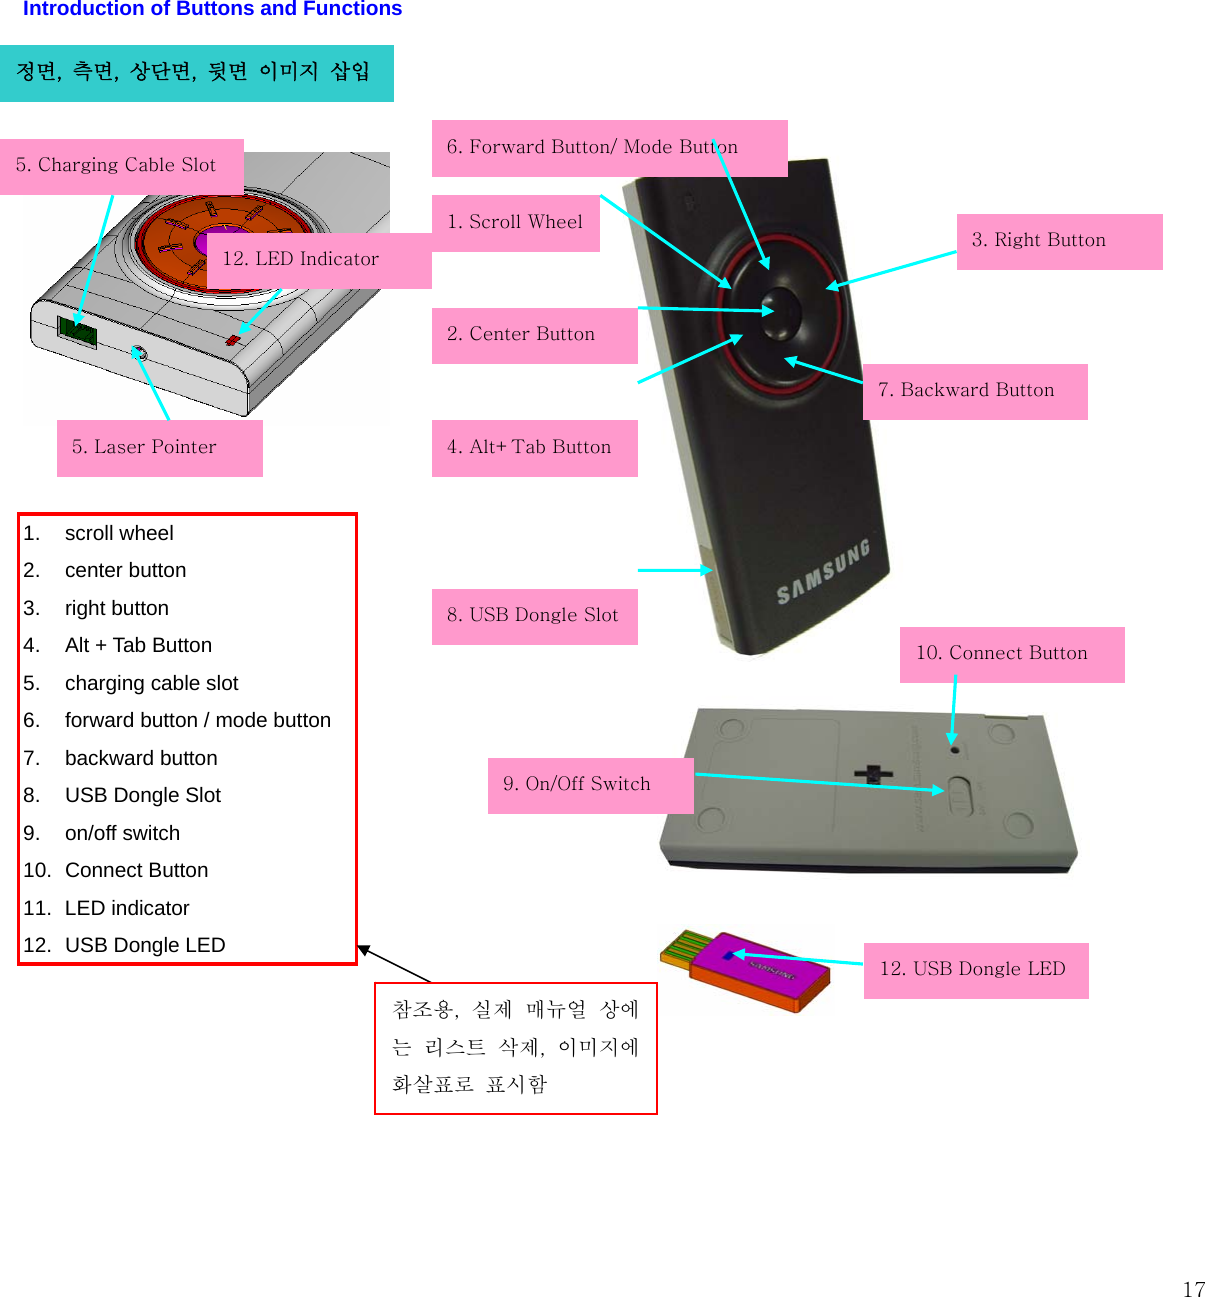  17Introduction of Buttons and Functions                                                                      1. scroll wheel 2. center button 3. right button 4.  Alt + Tab Button 5.  charging cable slot 6.  forward button / mode button 7. backward button 8. USB Dongle Slot 9. on/off switch 10. Connect Button 11. LED indicator 12. USB Dongle LED               12. USB Dongle LED 정면,  측면,  상단면,  뒷면  이미지  삽입 1. Scroll Wheel2. Center Button 3. Right Button 4. Alt+Tab Button 5. Laser Pointer 6. Forward Button/ Mode Button 7. Backward Button 8. USB Dongle Slot 9. On/Off Switch 10. Connect Button 5. Charging Cable Slot 12. LED Indicator  참조용,  실제  매뉴얼  상에는  리스트  삭제,  이미지에 화살표로  표시함 